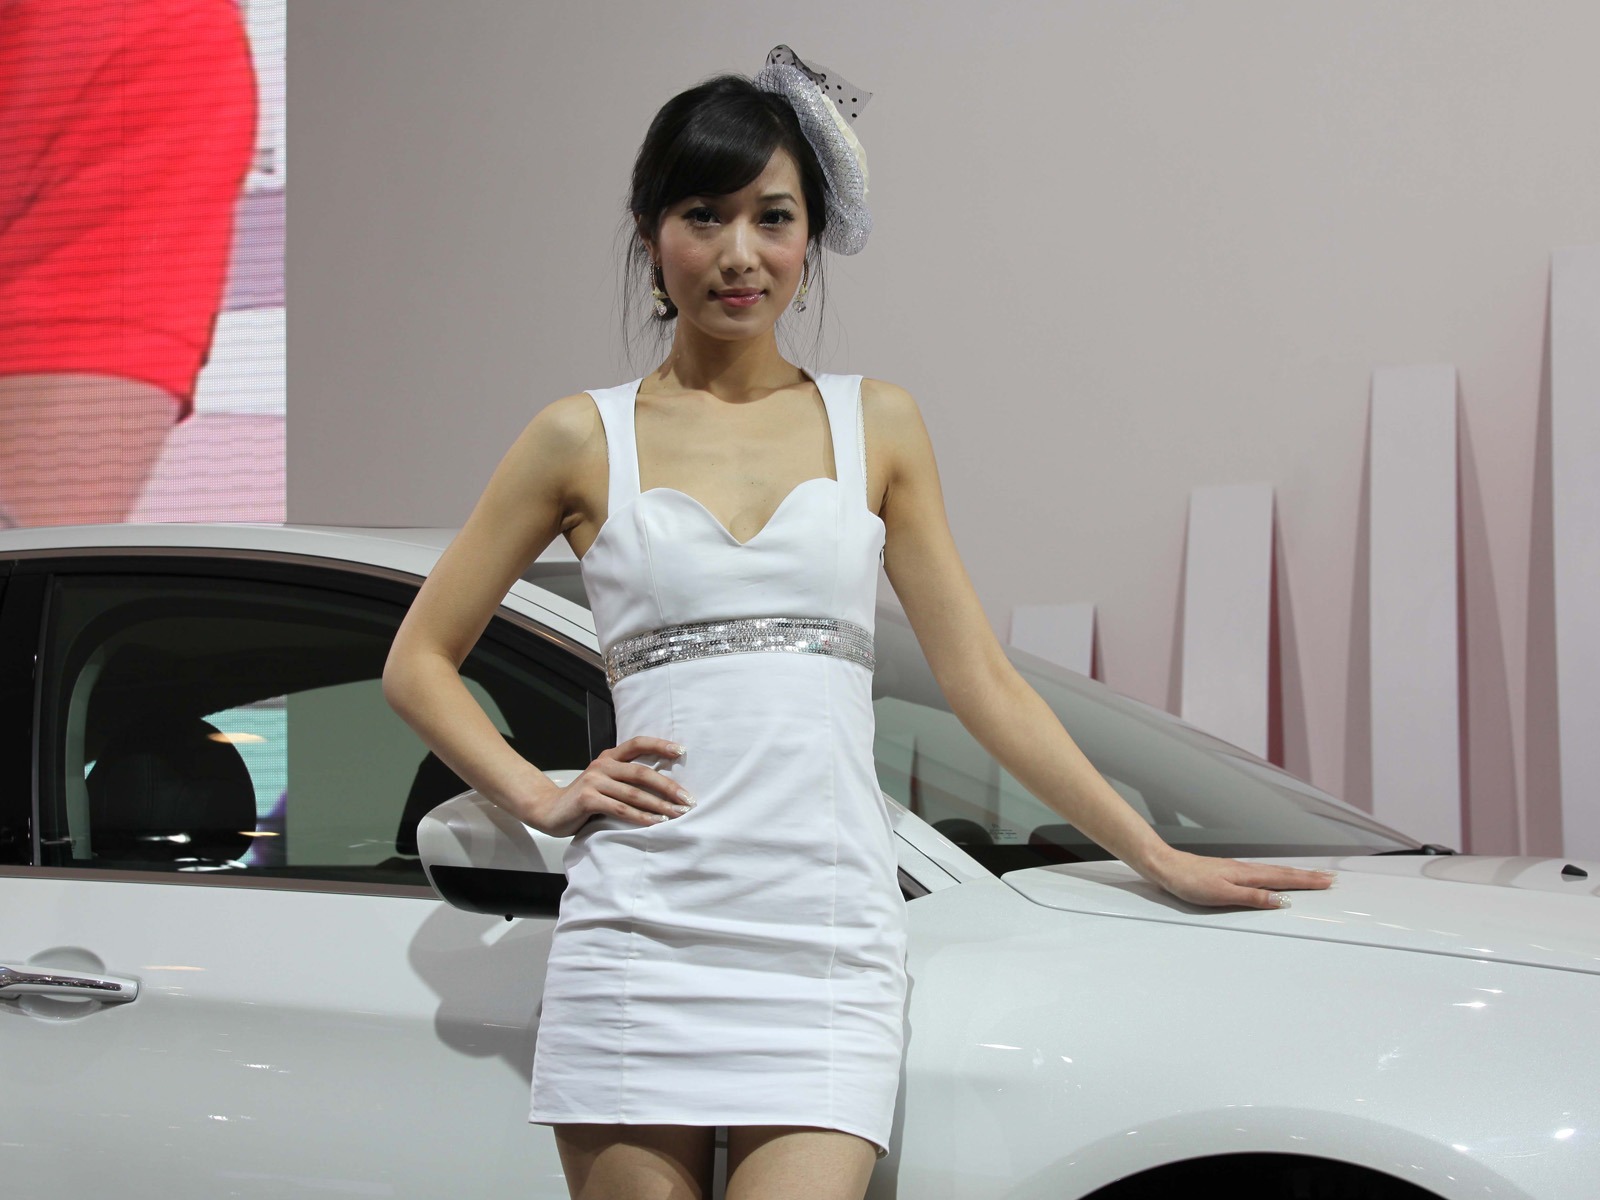 2010 Beijing International Auto Show beauty (2) (the wind chasing the clouds works) #33 - 1600x1200